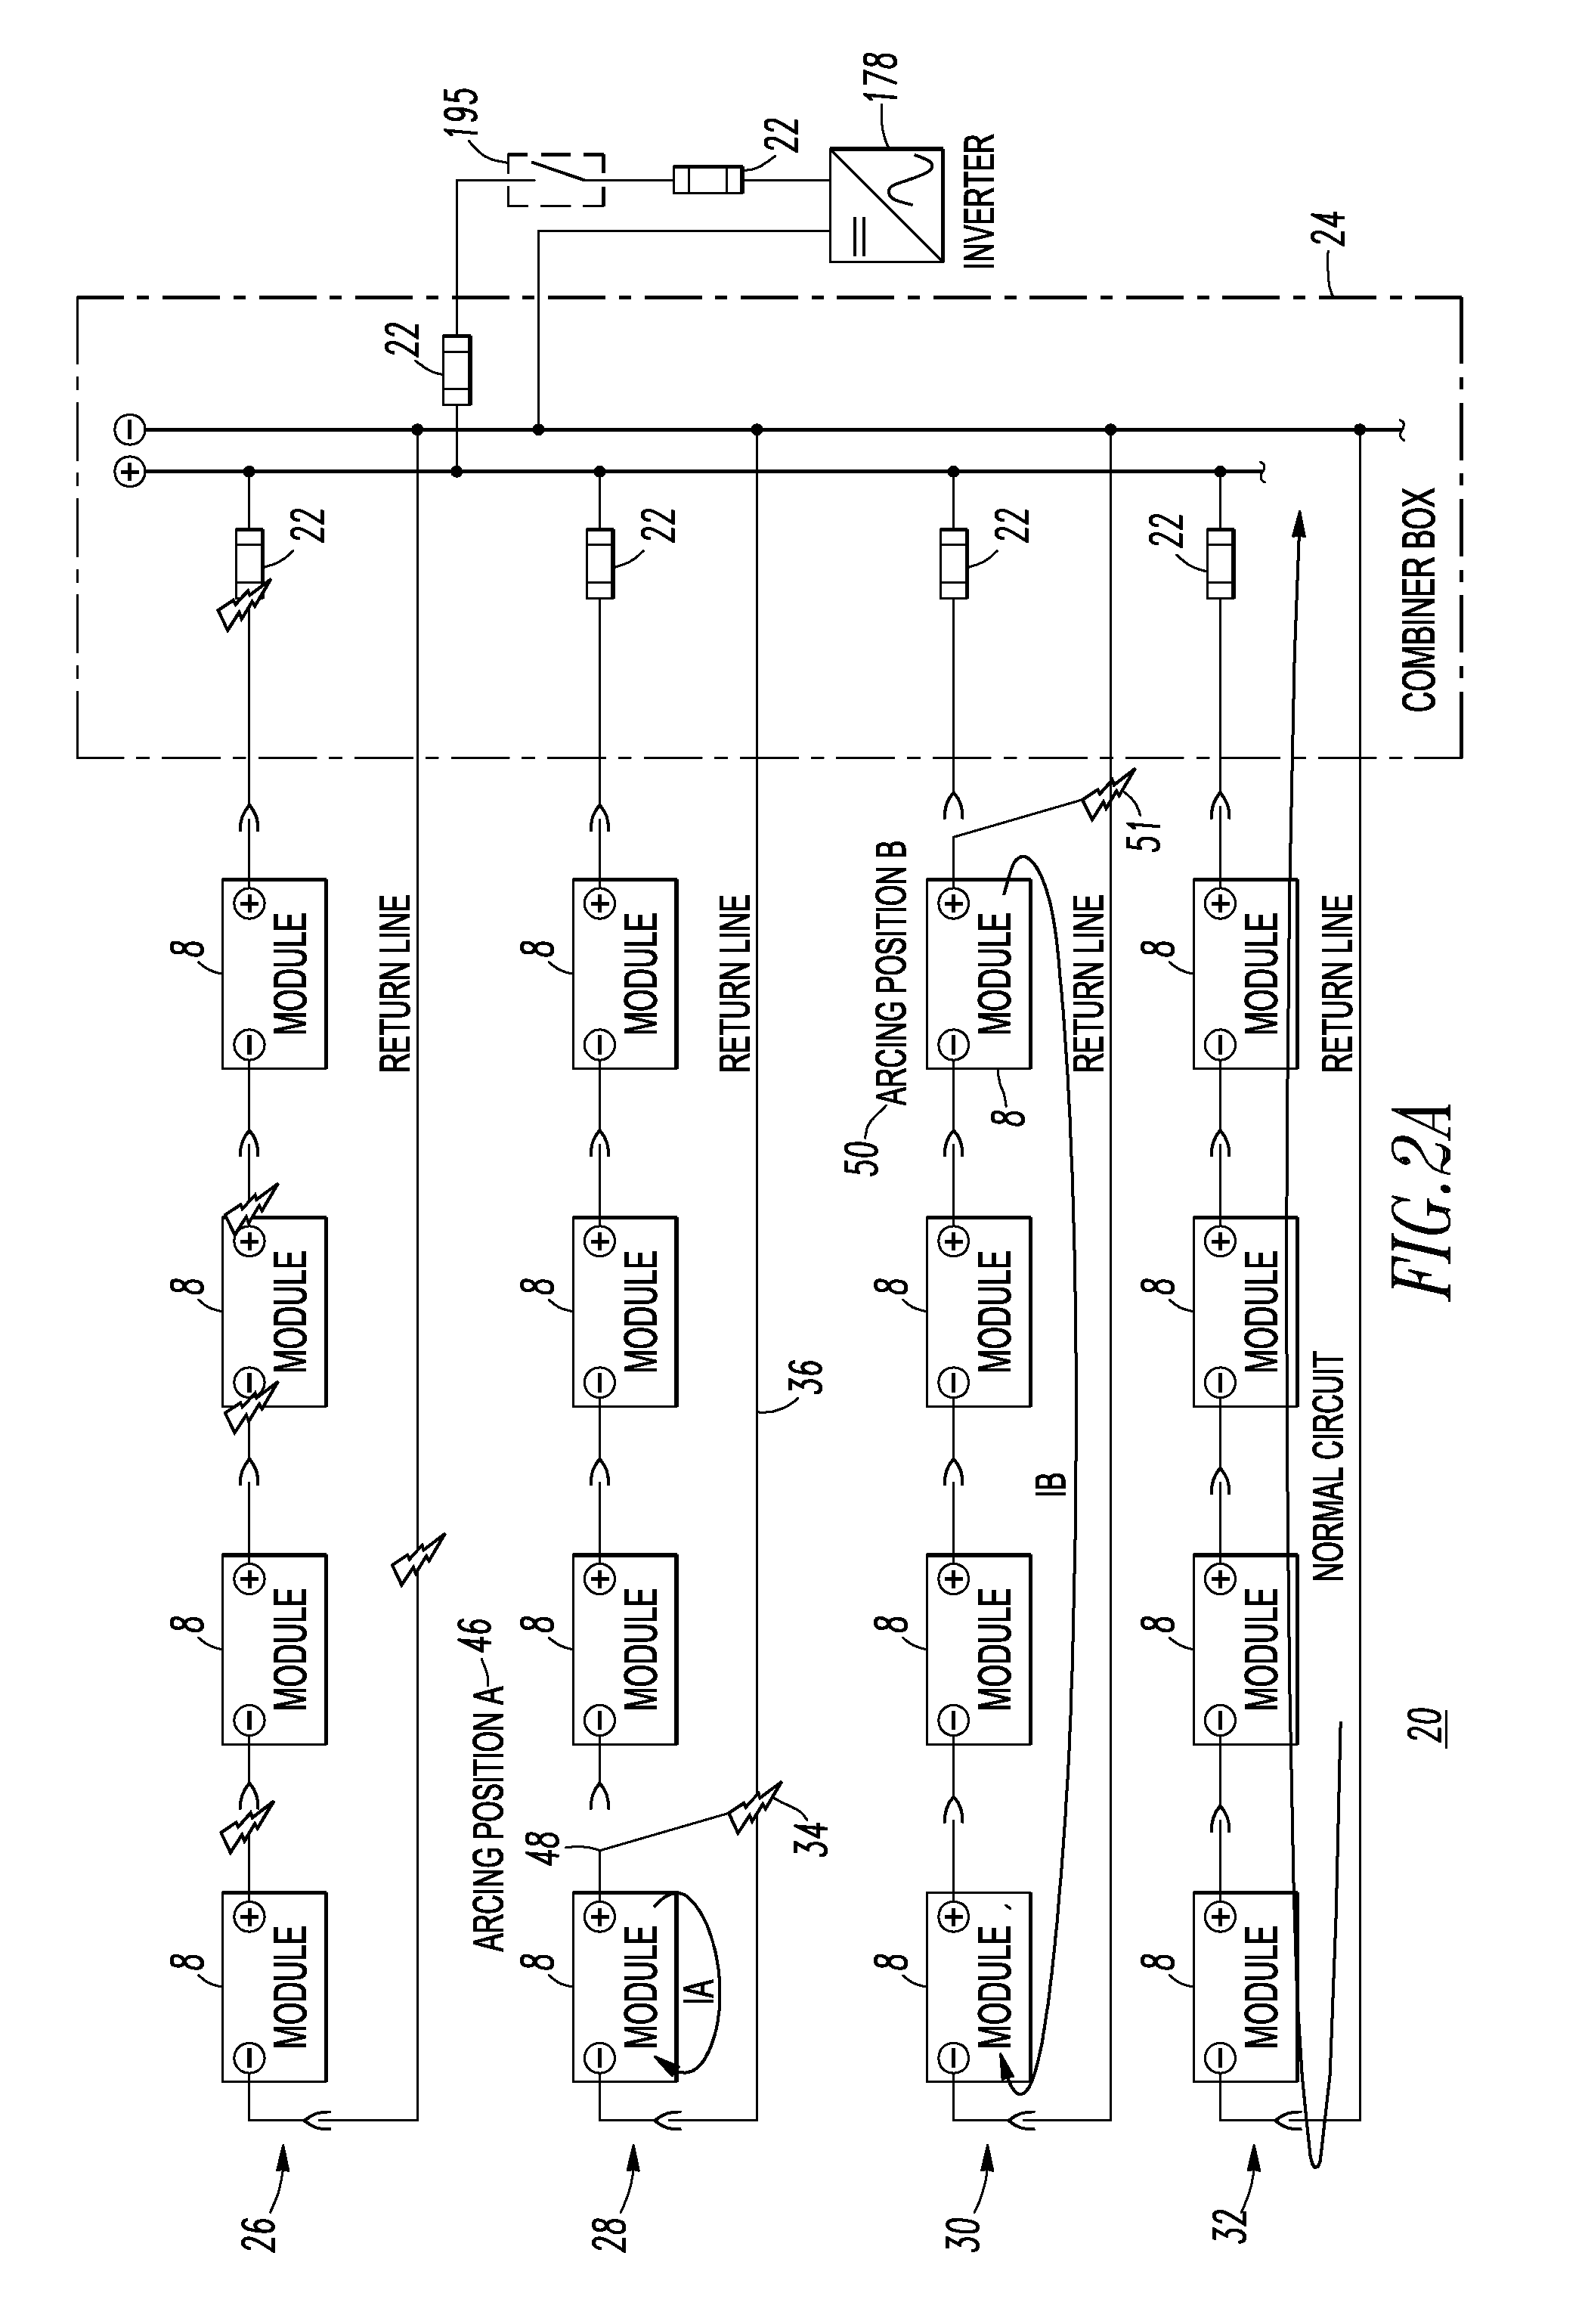 String and system employing direct current electrical generating modules and a number of string protectors